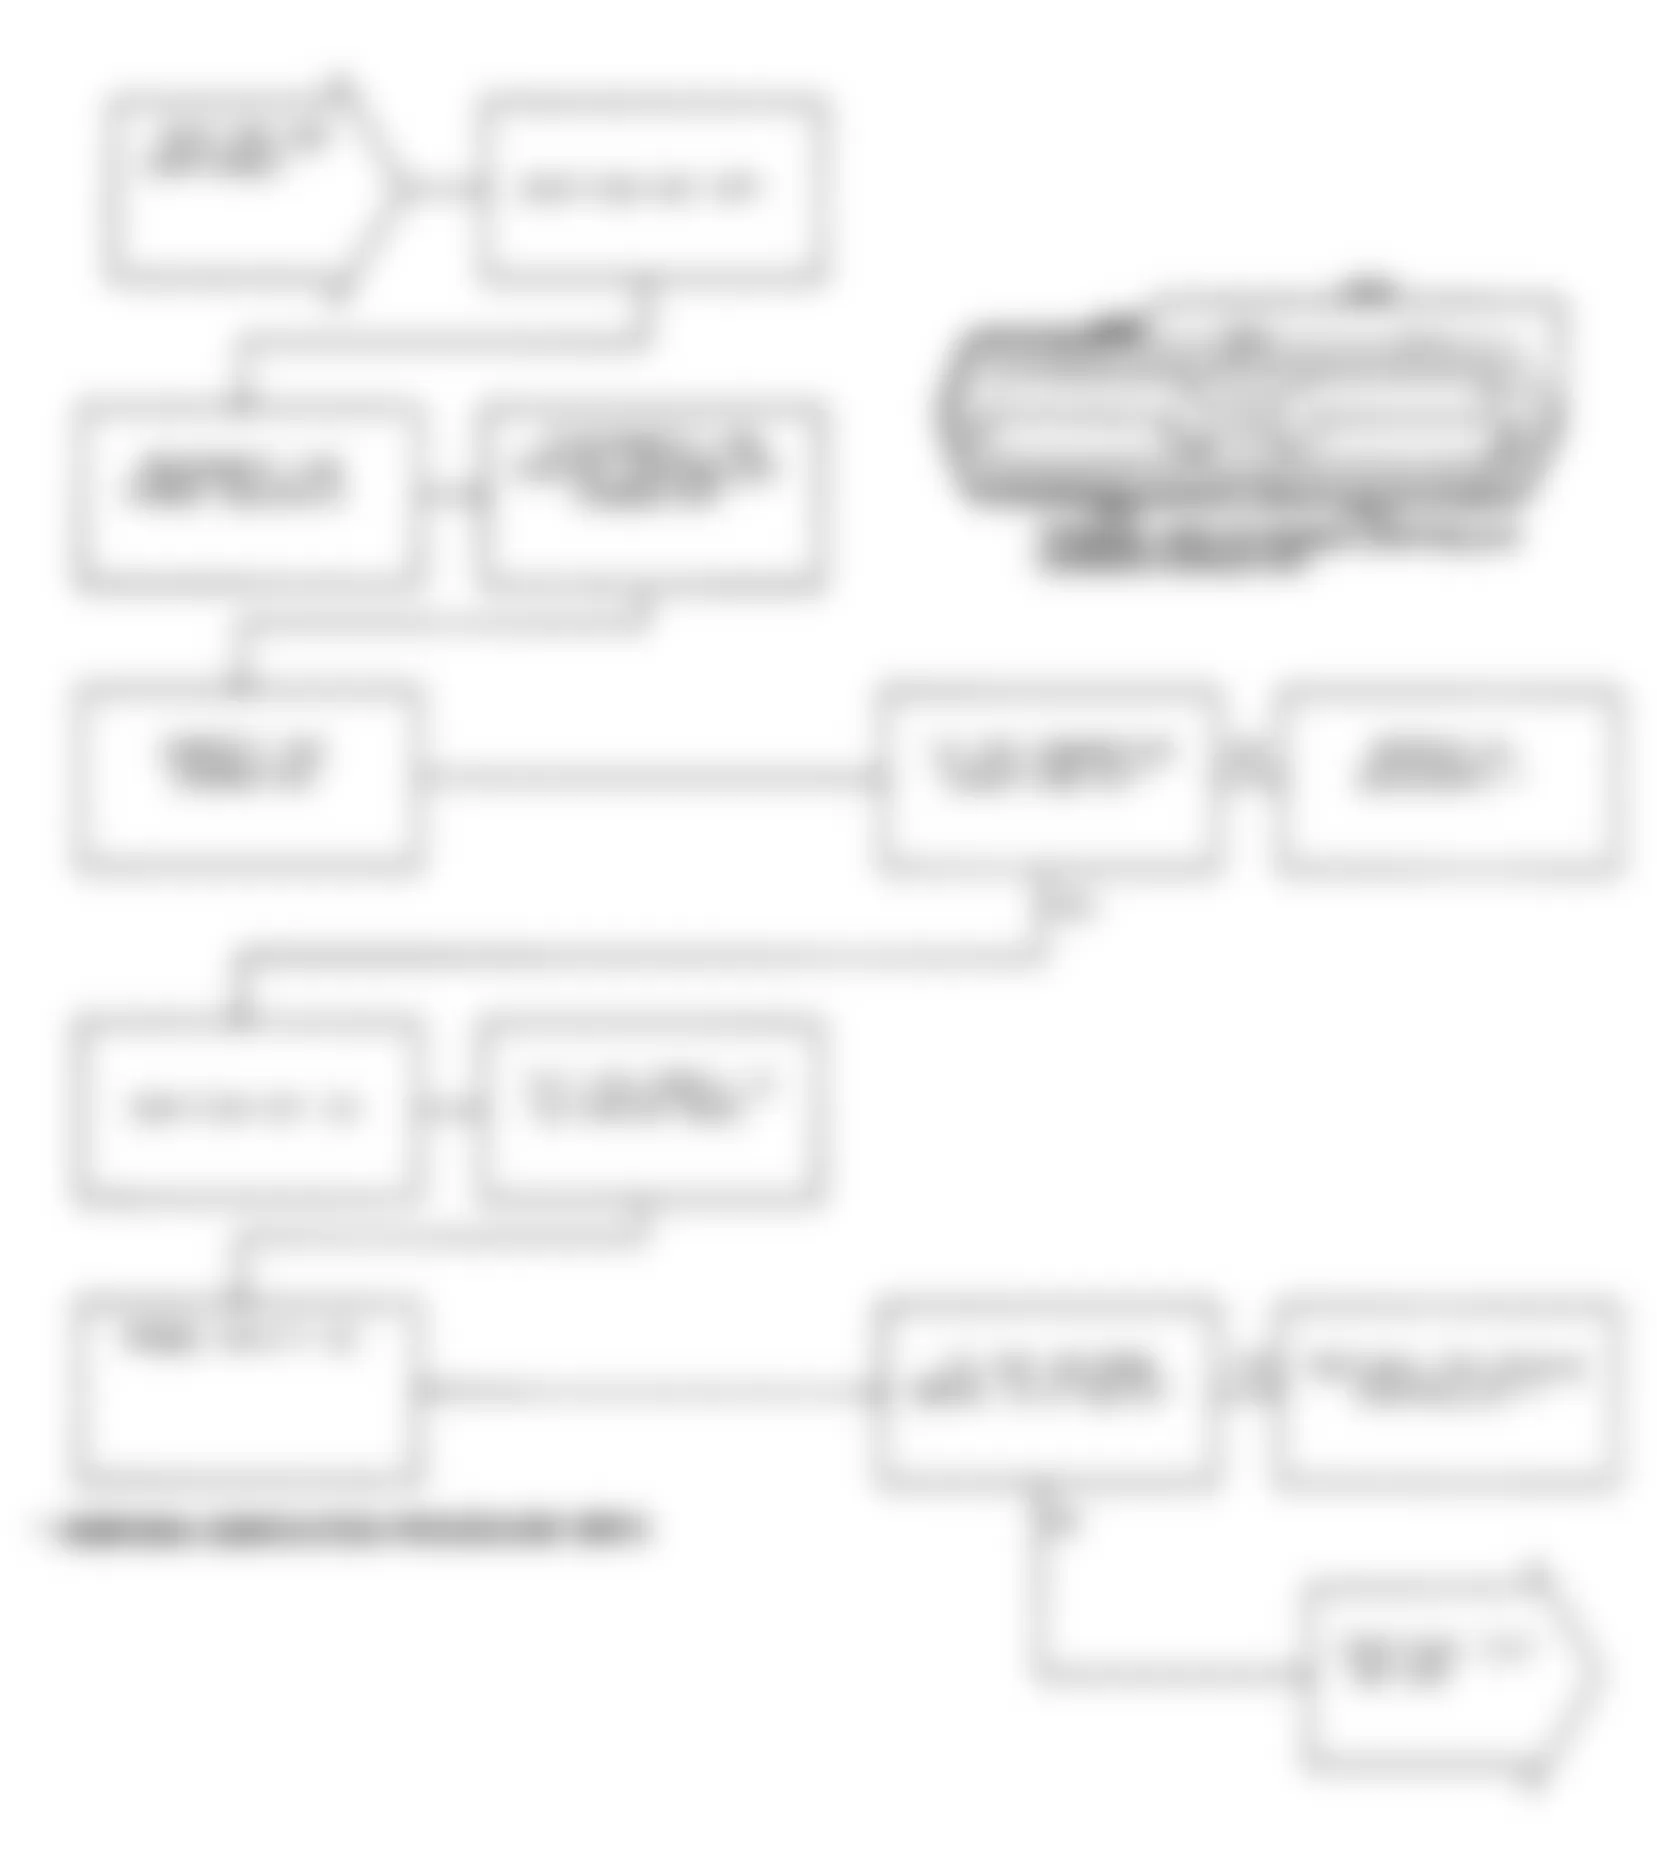 Chrysler LeBaron 1991 - Component Locations -  Test DR-18A Code 31, Diagnostic Flow Chart (2 of 3)